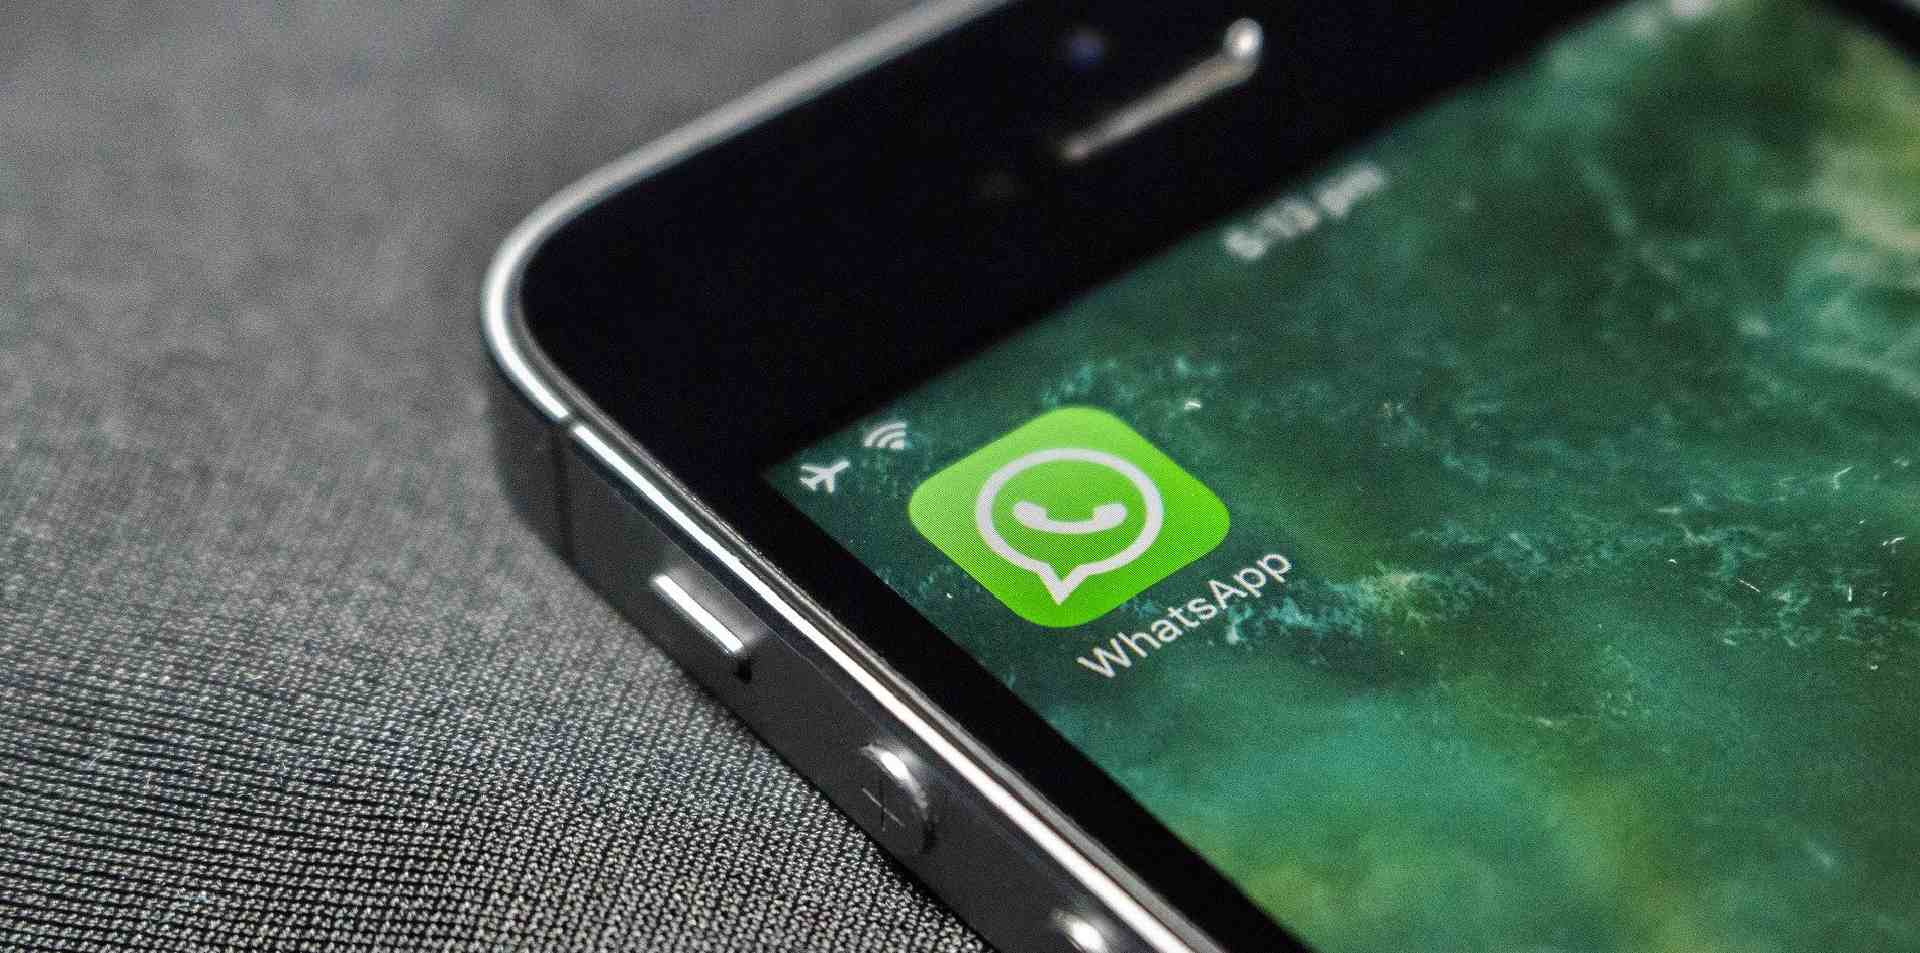 6 big changes are coming to the WhatsApp massage app in 2021